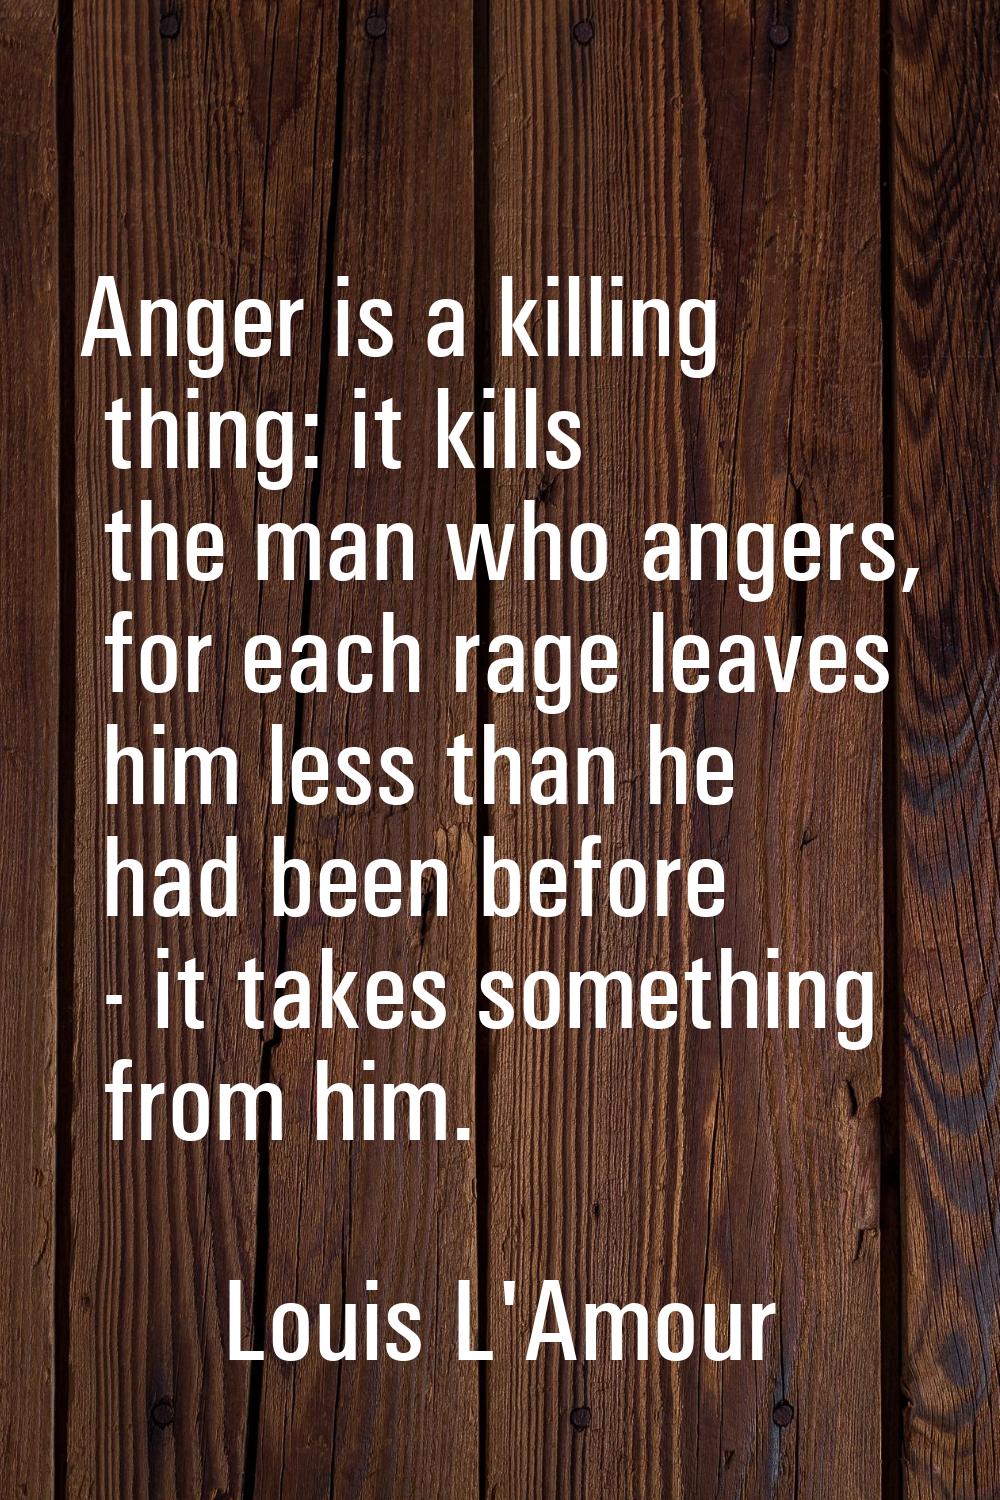 Anger is a killing thing: it kills the man who angers, for each rage leaves him less than he had be